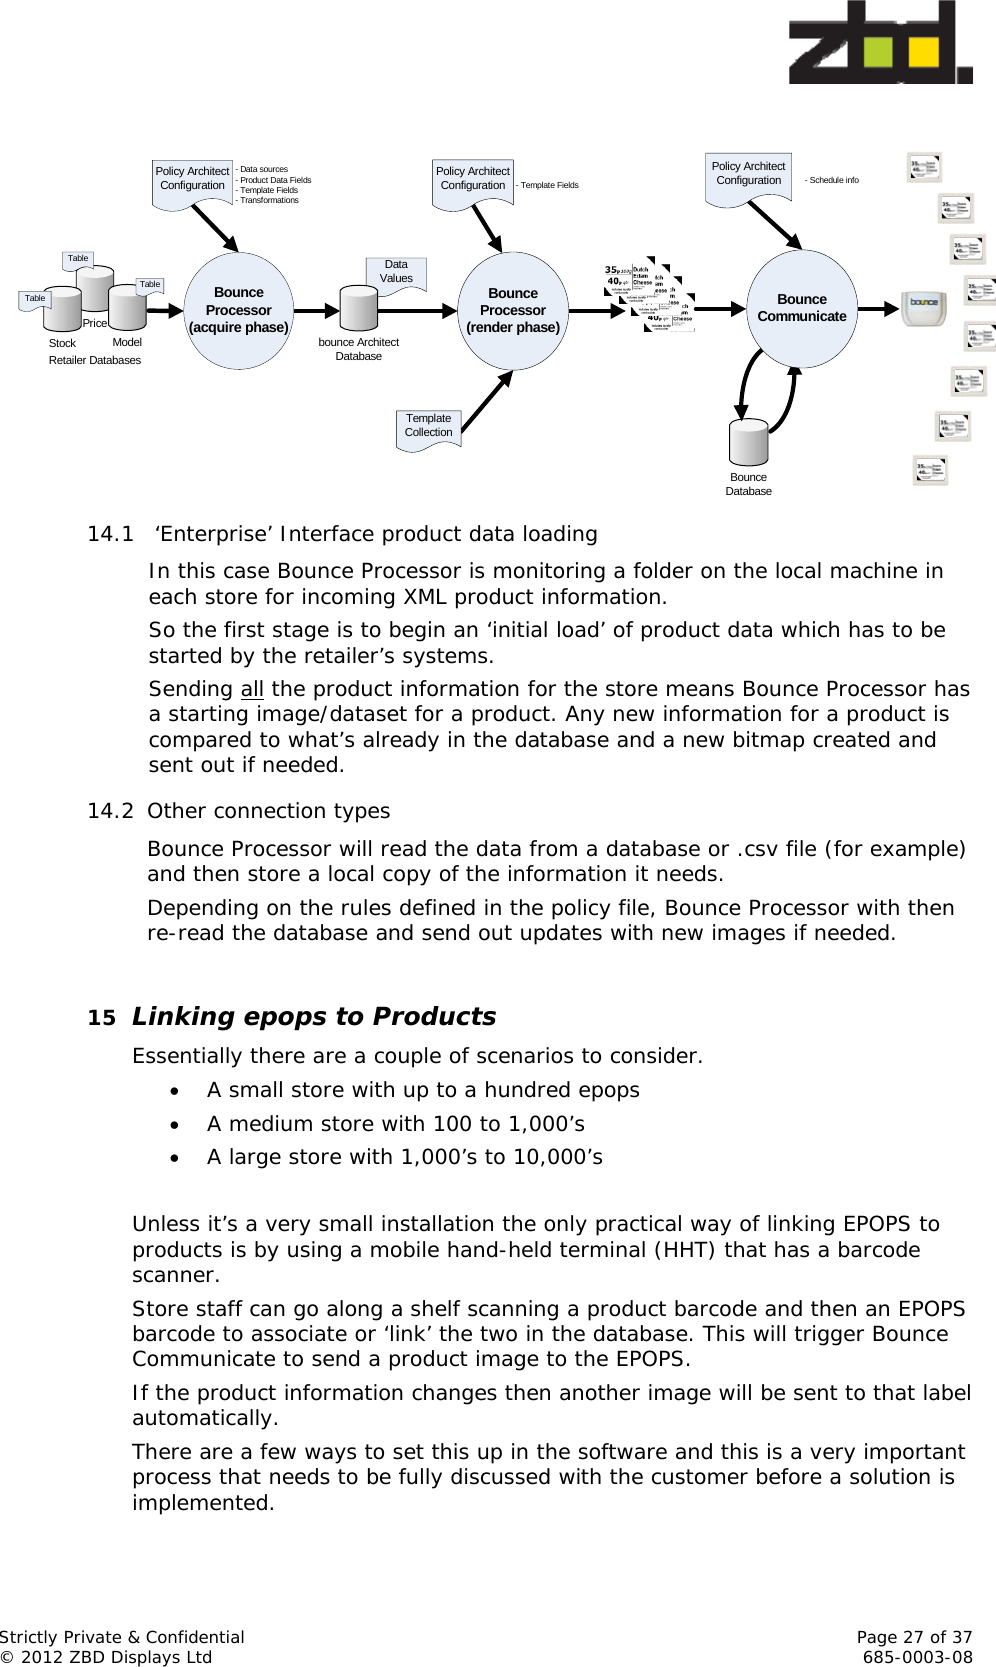  Strictly Private &amp; Confidential    Page 27 of 37 © 2012 ZBD Displays Ltd     685-0003-08 Bounce Processor (acquire phase)Policy ArchitectConfigurationData Values- Data sources- Product Data Fields- Template Fields- TransformationsBounce Processor (render phase)Policy ArchitectConfiguration - Template FieldsTemplateCollectionBounceDatabaseBounceCommunicatePolicy ArchitectConfiguration - Schedule infoPriceModelStockRetailer DatabasesTableTableTablebounce ArchitectDatabase          14.1  ‘Enterprise’ Interface product data loading In this case Bounce Processor is monitoring a folder on the local machine in each store for incoming XML product information. So the first stage is to begin an ‘initial load’ of product data which has to be started by the retailer’s systems. Sending all the product information for the store means Bounce Processor has a starting image/dataset for a product. Any new information for a product is compared to what’s already in the database and a new bitmap created and sent out if needed. 14.2 Other connection types Bounce Processor will read the data from a database or .csv file (for example) and then store a local copy of the information it needs. Depending on the rules defined in the policy file, Bounce Processor with then re-read the database and send out updates with new images if needed.  15 Linking epops to Products Essentially there are a couple of scenarios to consider.  A small store with up to a hundred epops  A medium store with 100 to 1,000’s  A large store with 1,000’s to 10,000’s  Unless it’s a very small installation the only practical way of linking EPOPS to products is by using a mobile hand-held terminal (HHT) that has a barcode scanner. Store staff can go along a shelf scanning a product barcode and then an EPOPS barcode to associate or ‘link’ the two in the database. This will trigger Bounce Communicate to send a product image to the EPOPS.  If the product information changes then another image will be sent to that label automatically. There are a few ways to set this up in the software and this is a very important process that needs to be fully discussed with the customer before a solution is implemented. 